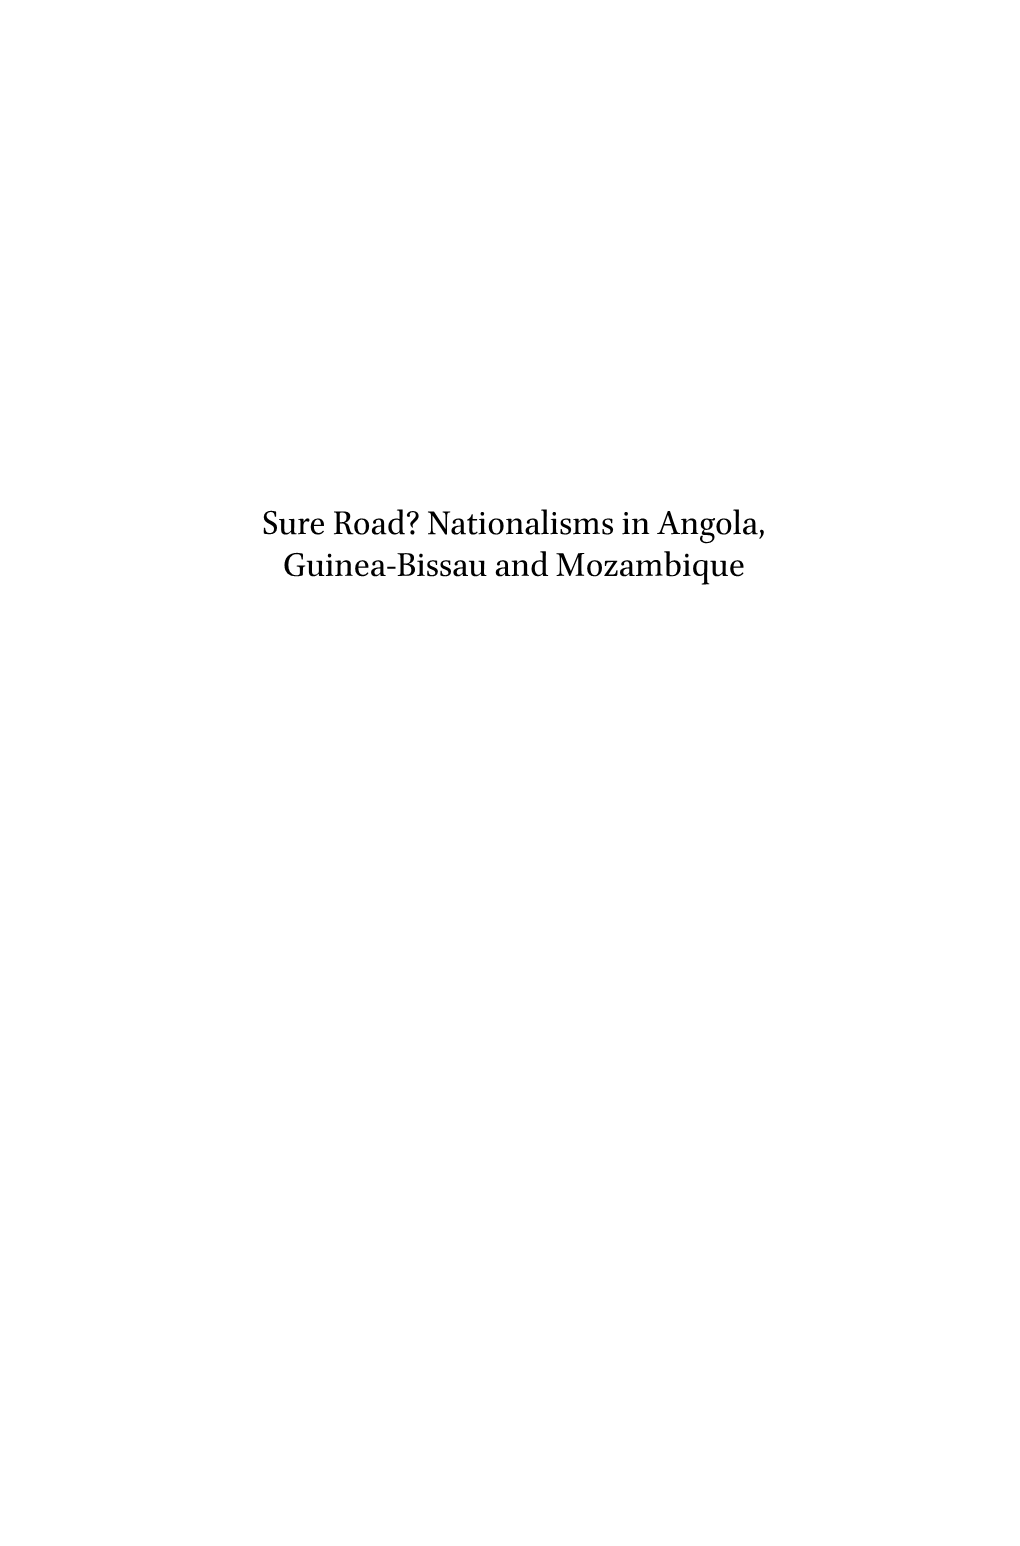 Sure Road? Nationalisms in Angola, Guinea-Bissau and Mozambique African Social Studies Series